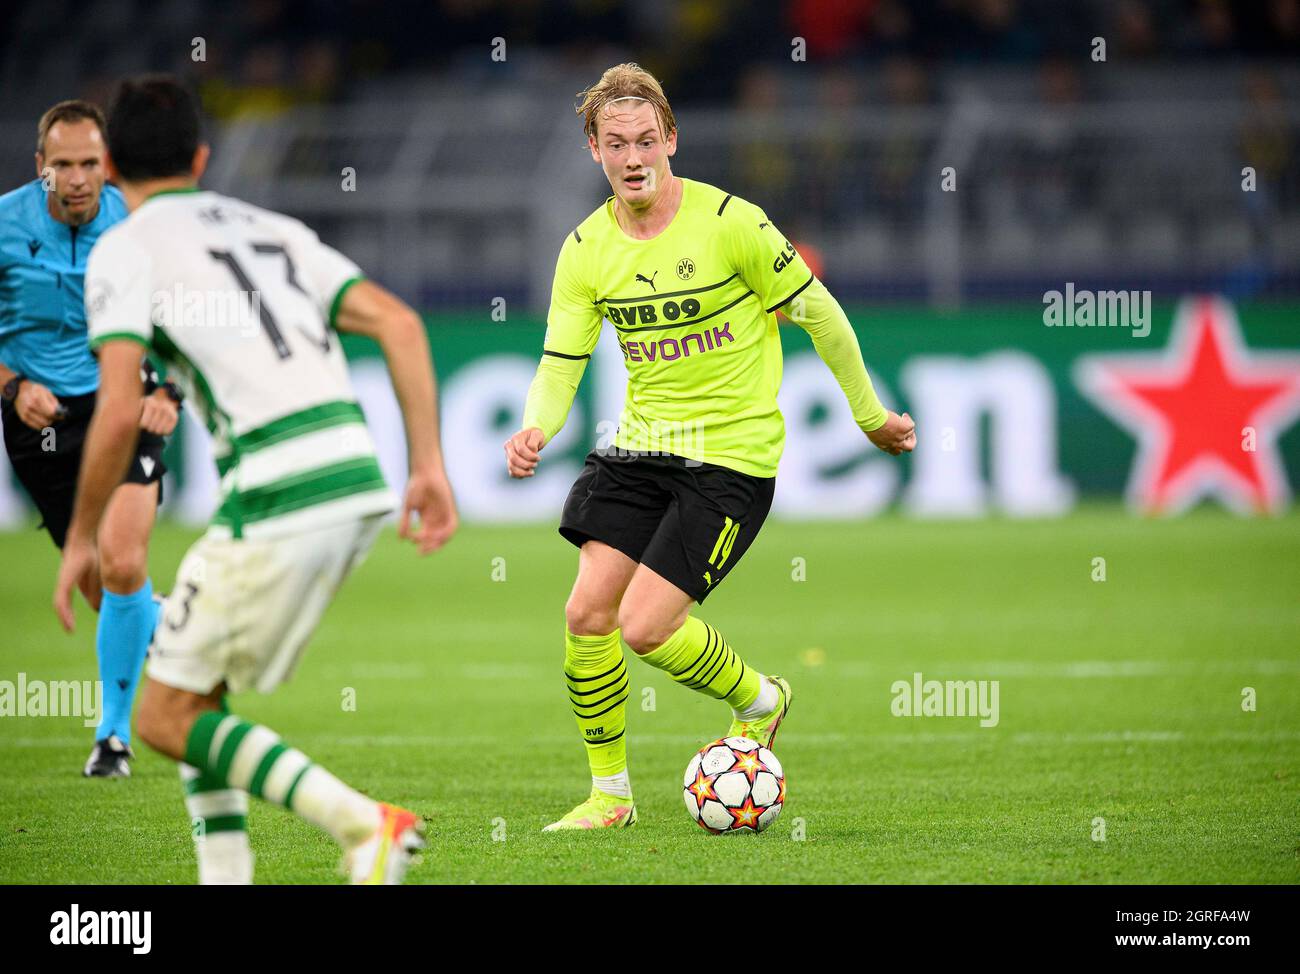 Julian BRANDT r. (DO) in the duel versusLuis NETO (LIS), action, football Champions League, preliminary round 2nd matchday, Borussia Dortmund (DO) - Sporting Lisbon (LIS) 1: 0, on 09/28/2021 in Dortmund/Germany. Â Stock Photo